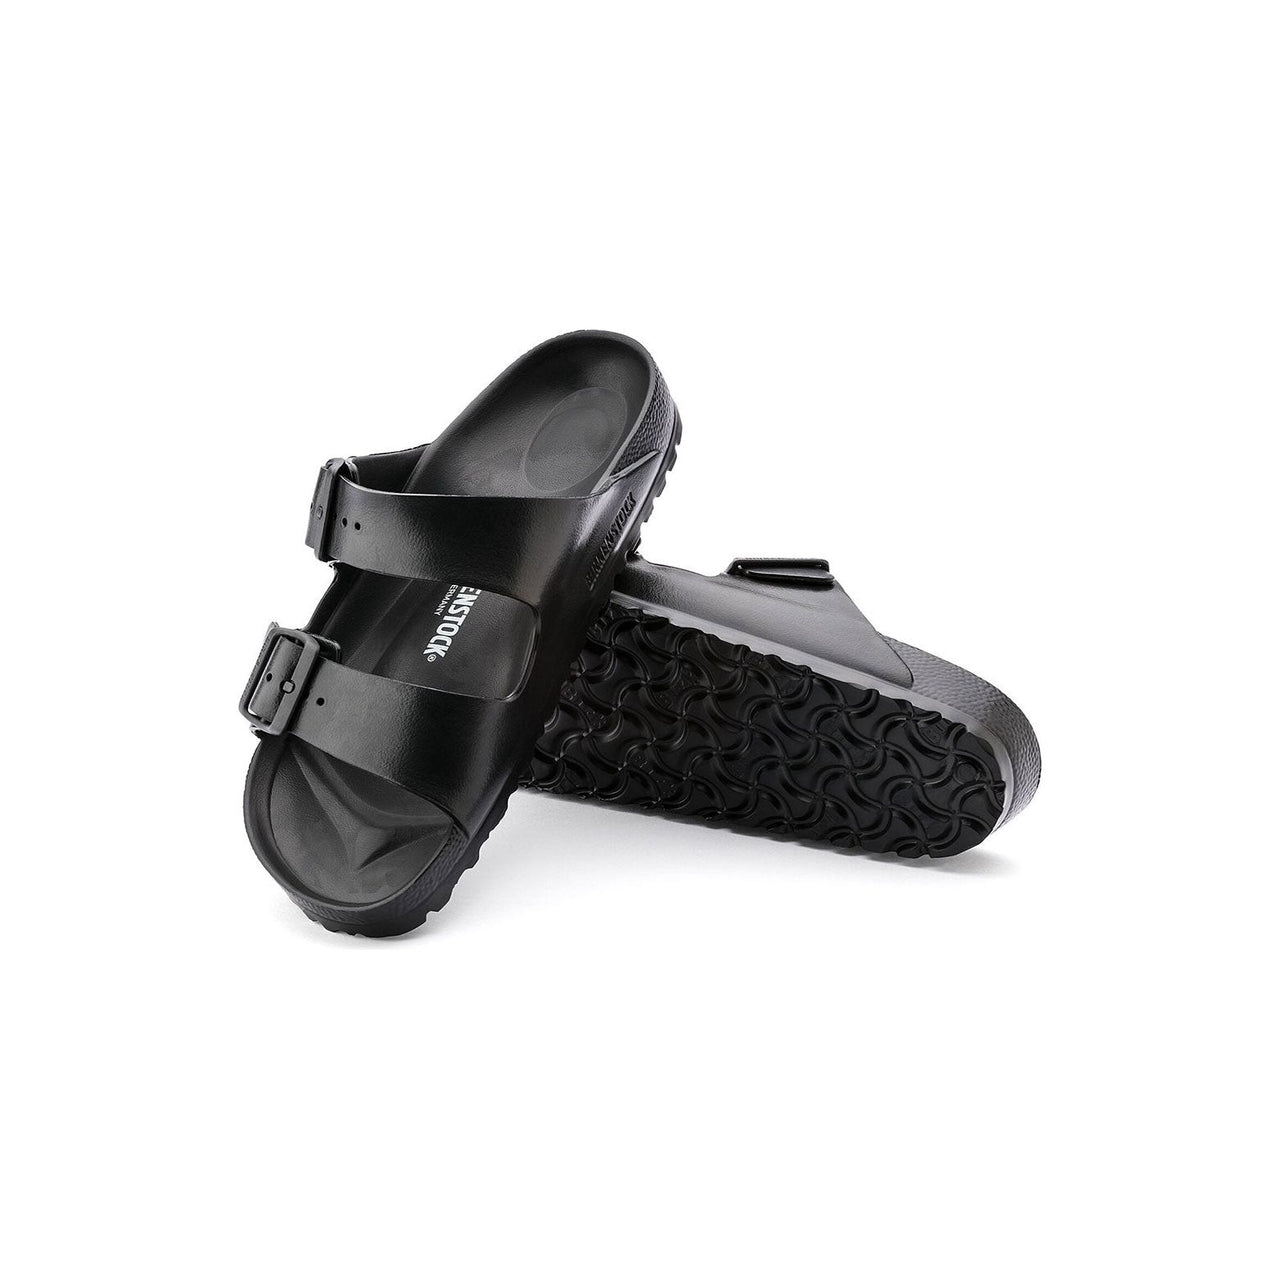  Arizona Eva Sandals Black featuring a contoured footbed for arch support 